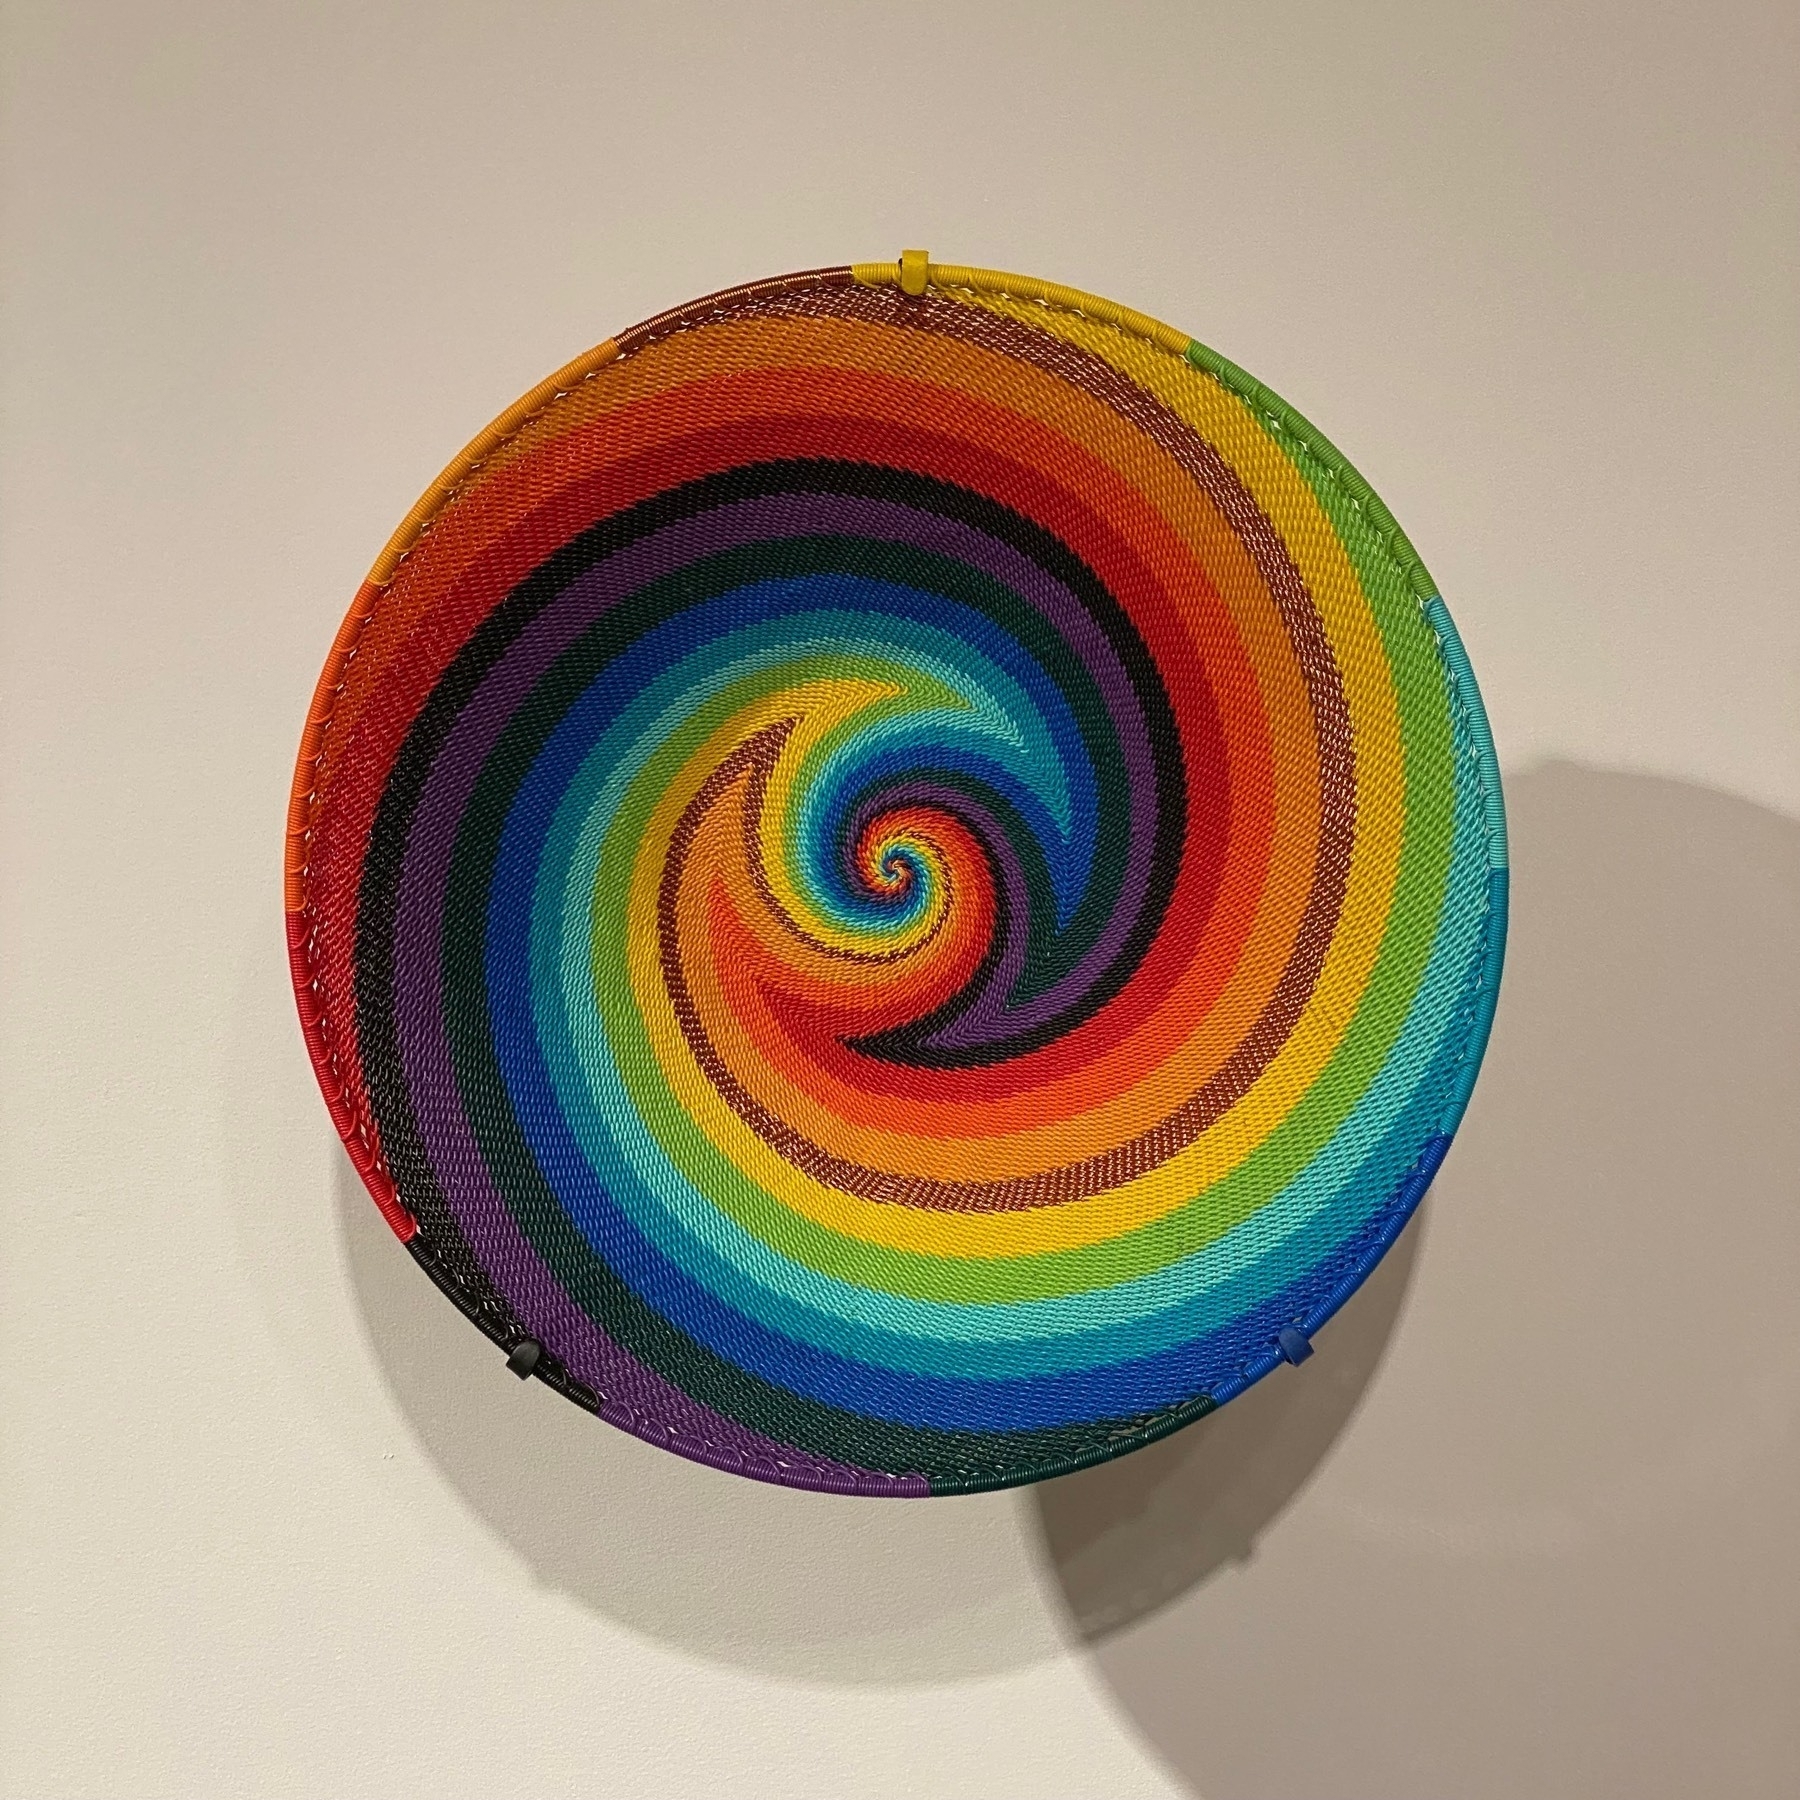 Bowel woven from brightly colored telephone wire.